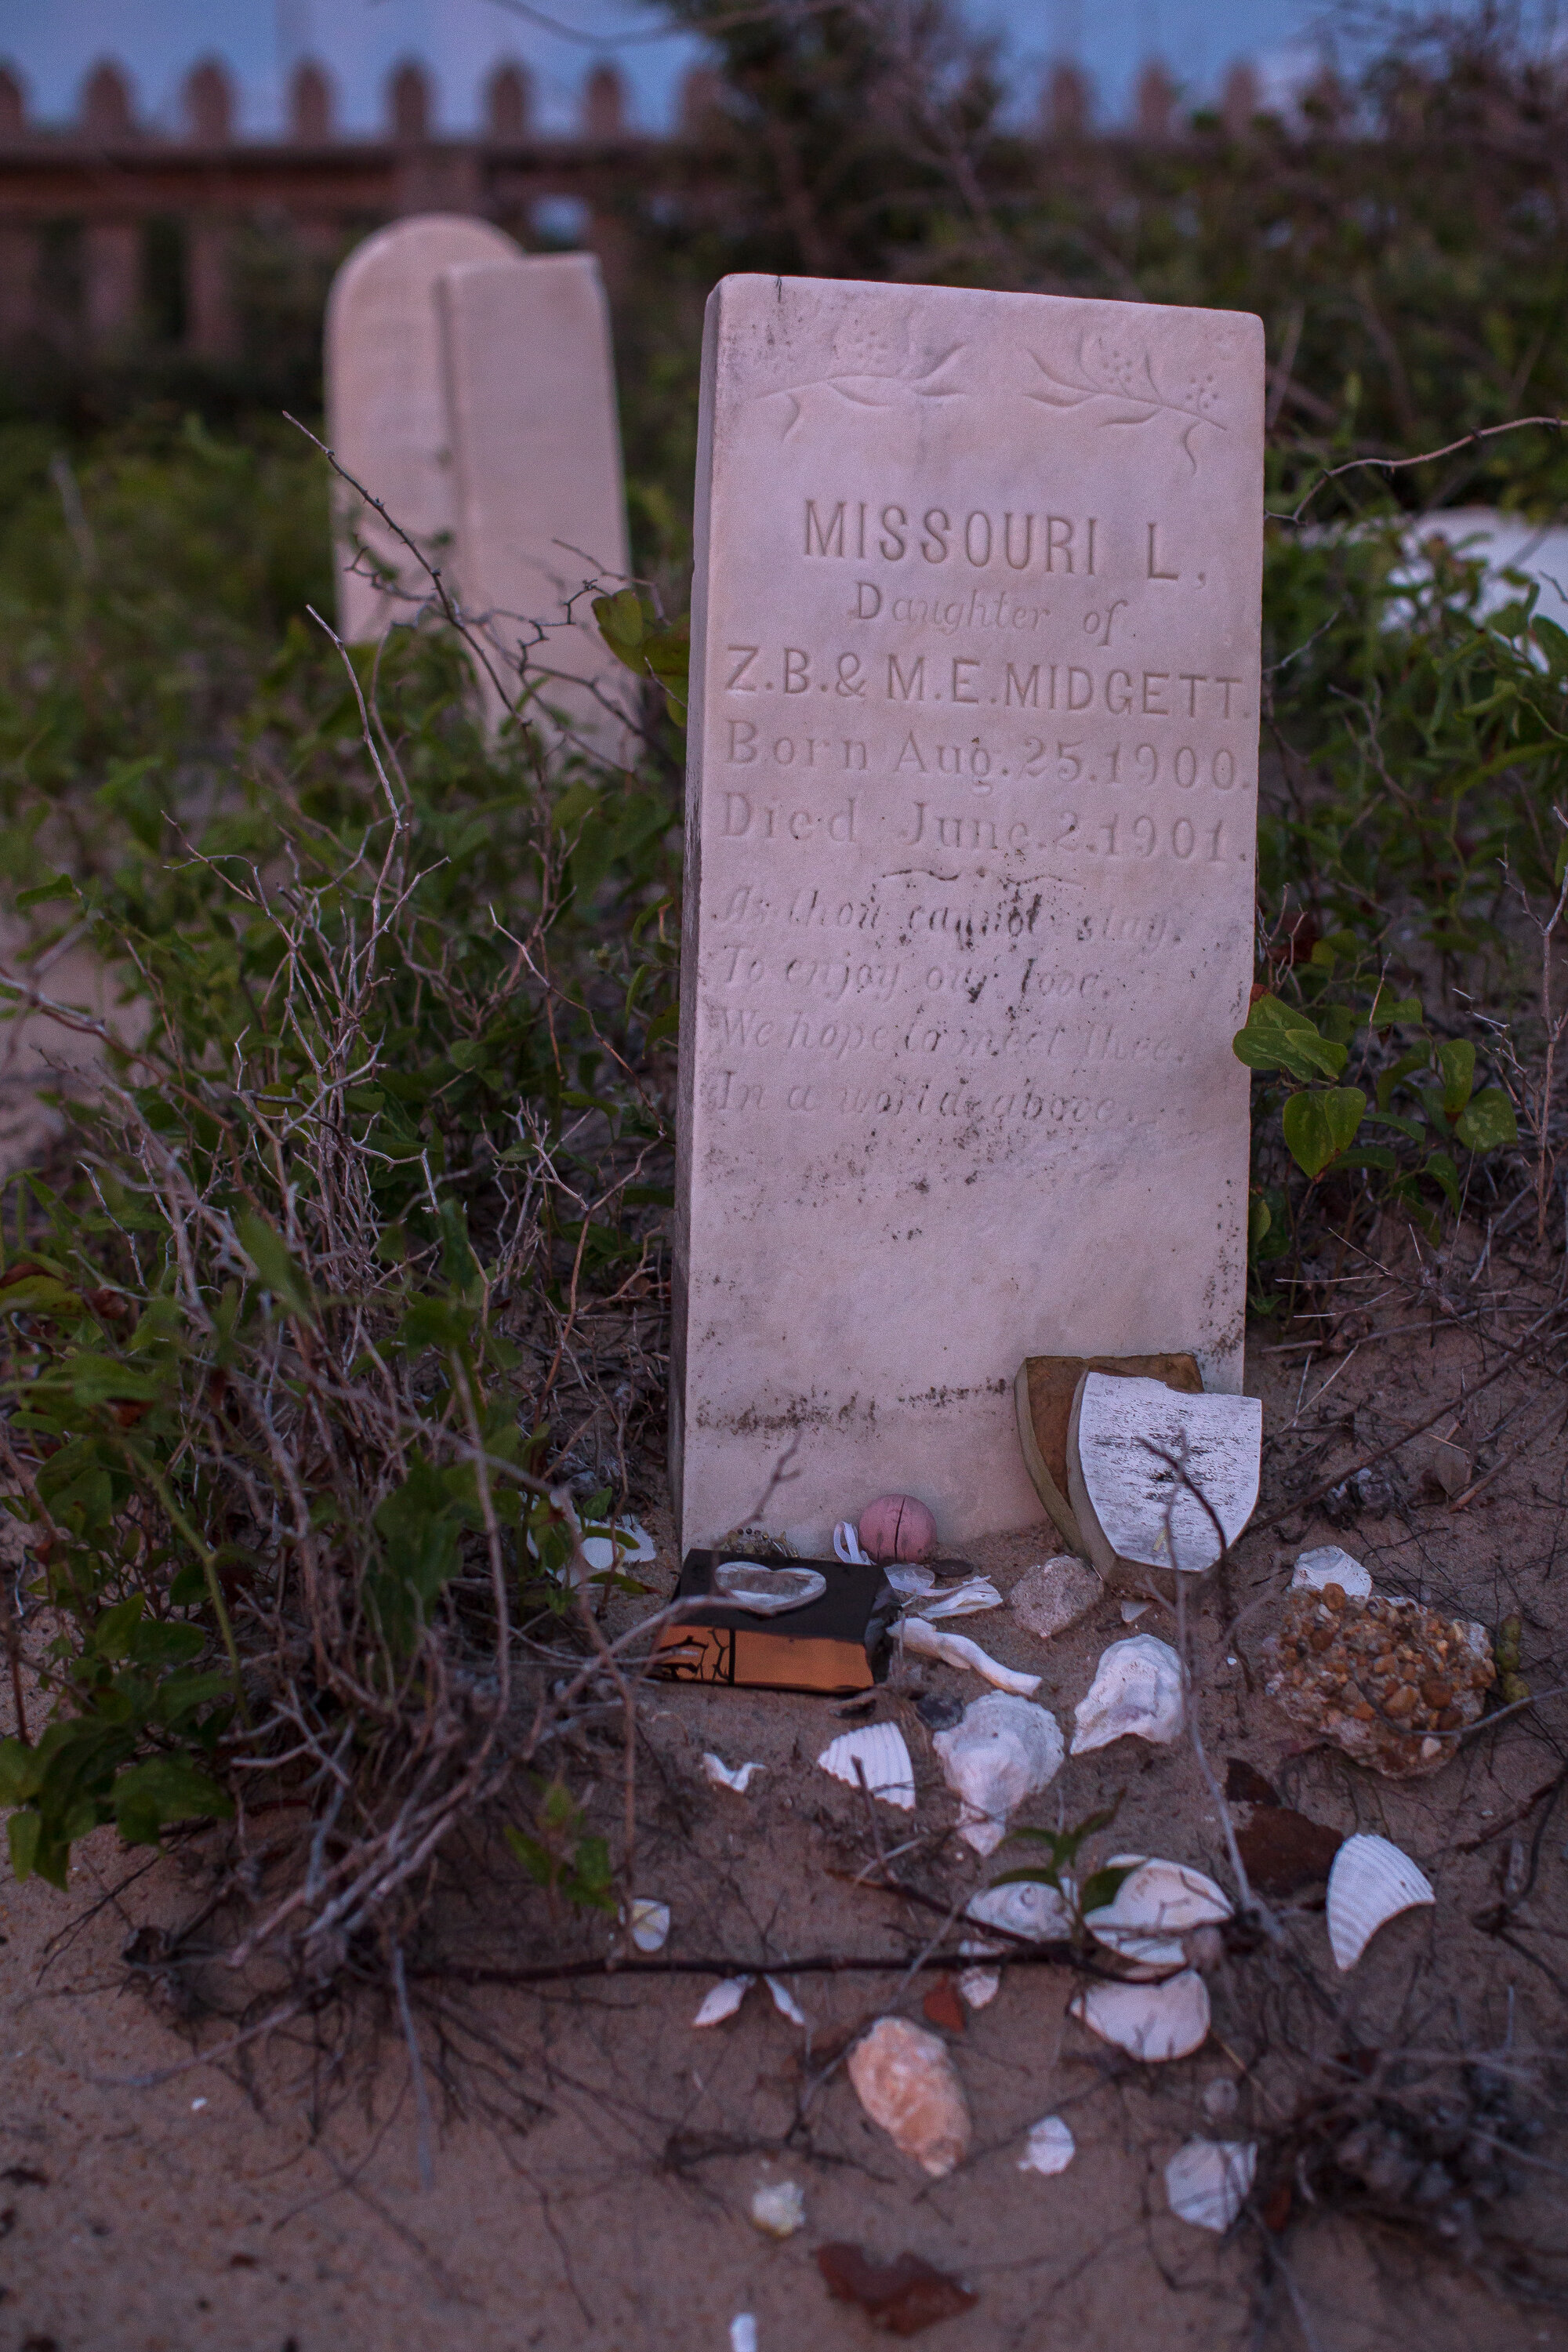  Tributes left behind on the grave of Missouri L. Midgett, who died at 10-months old in 1901. 